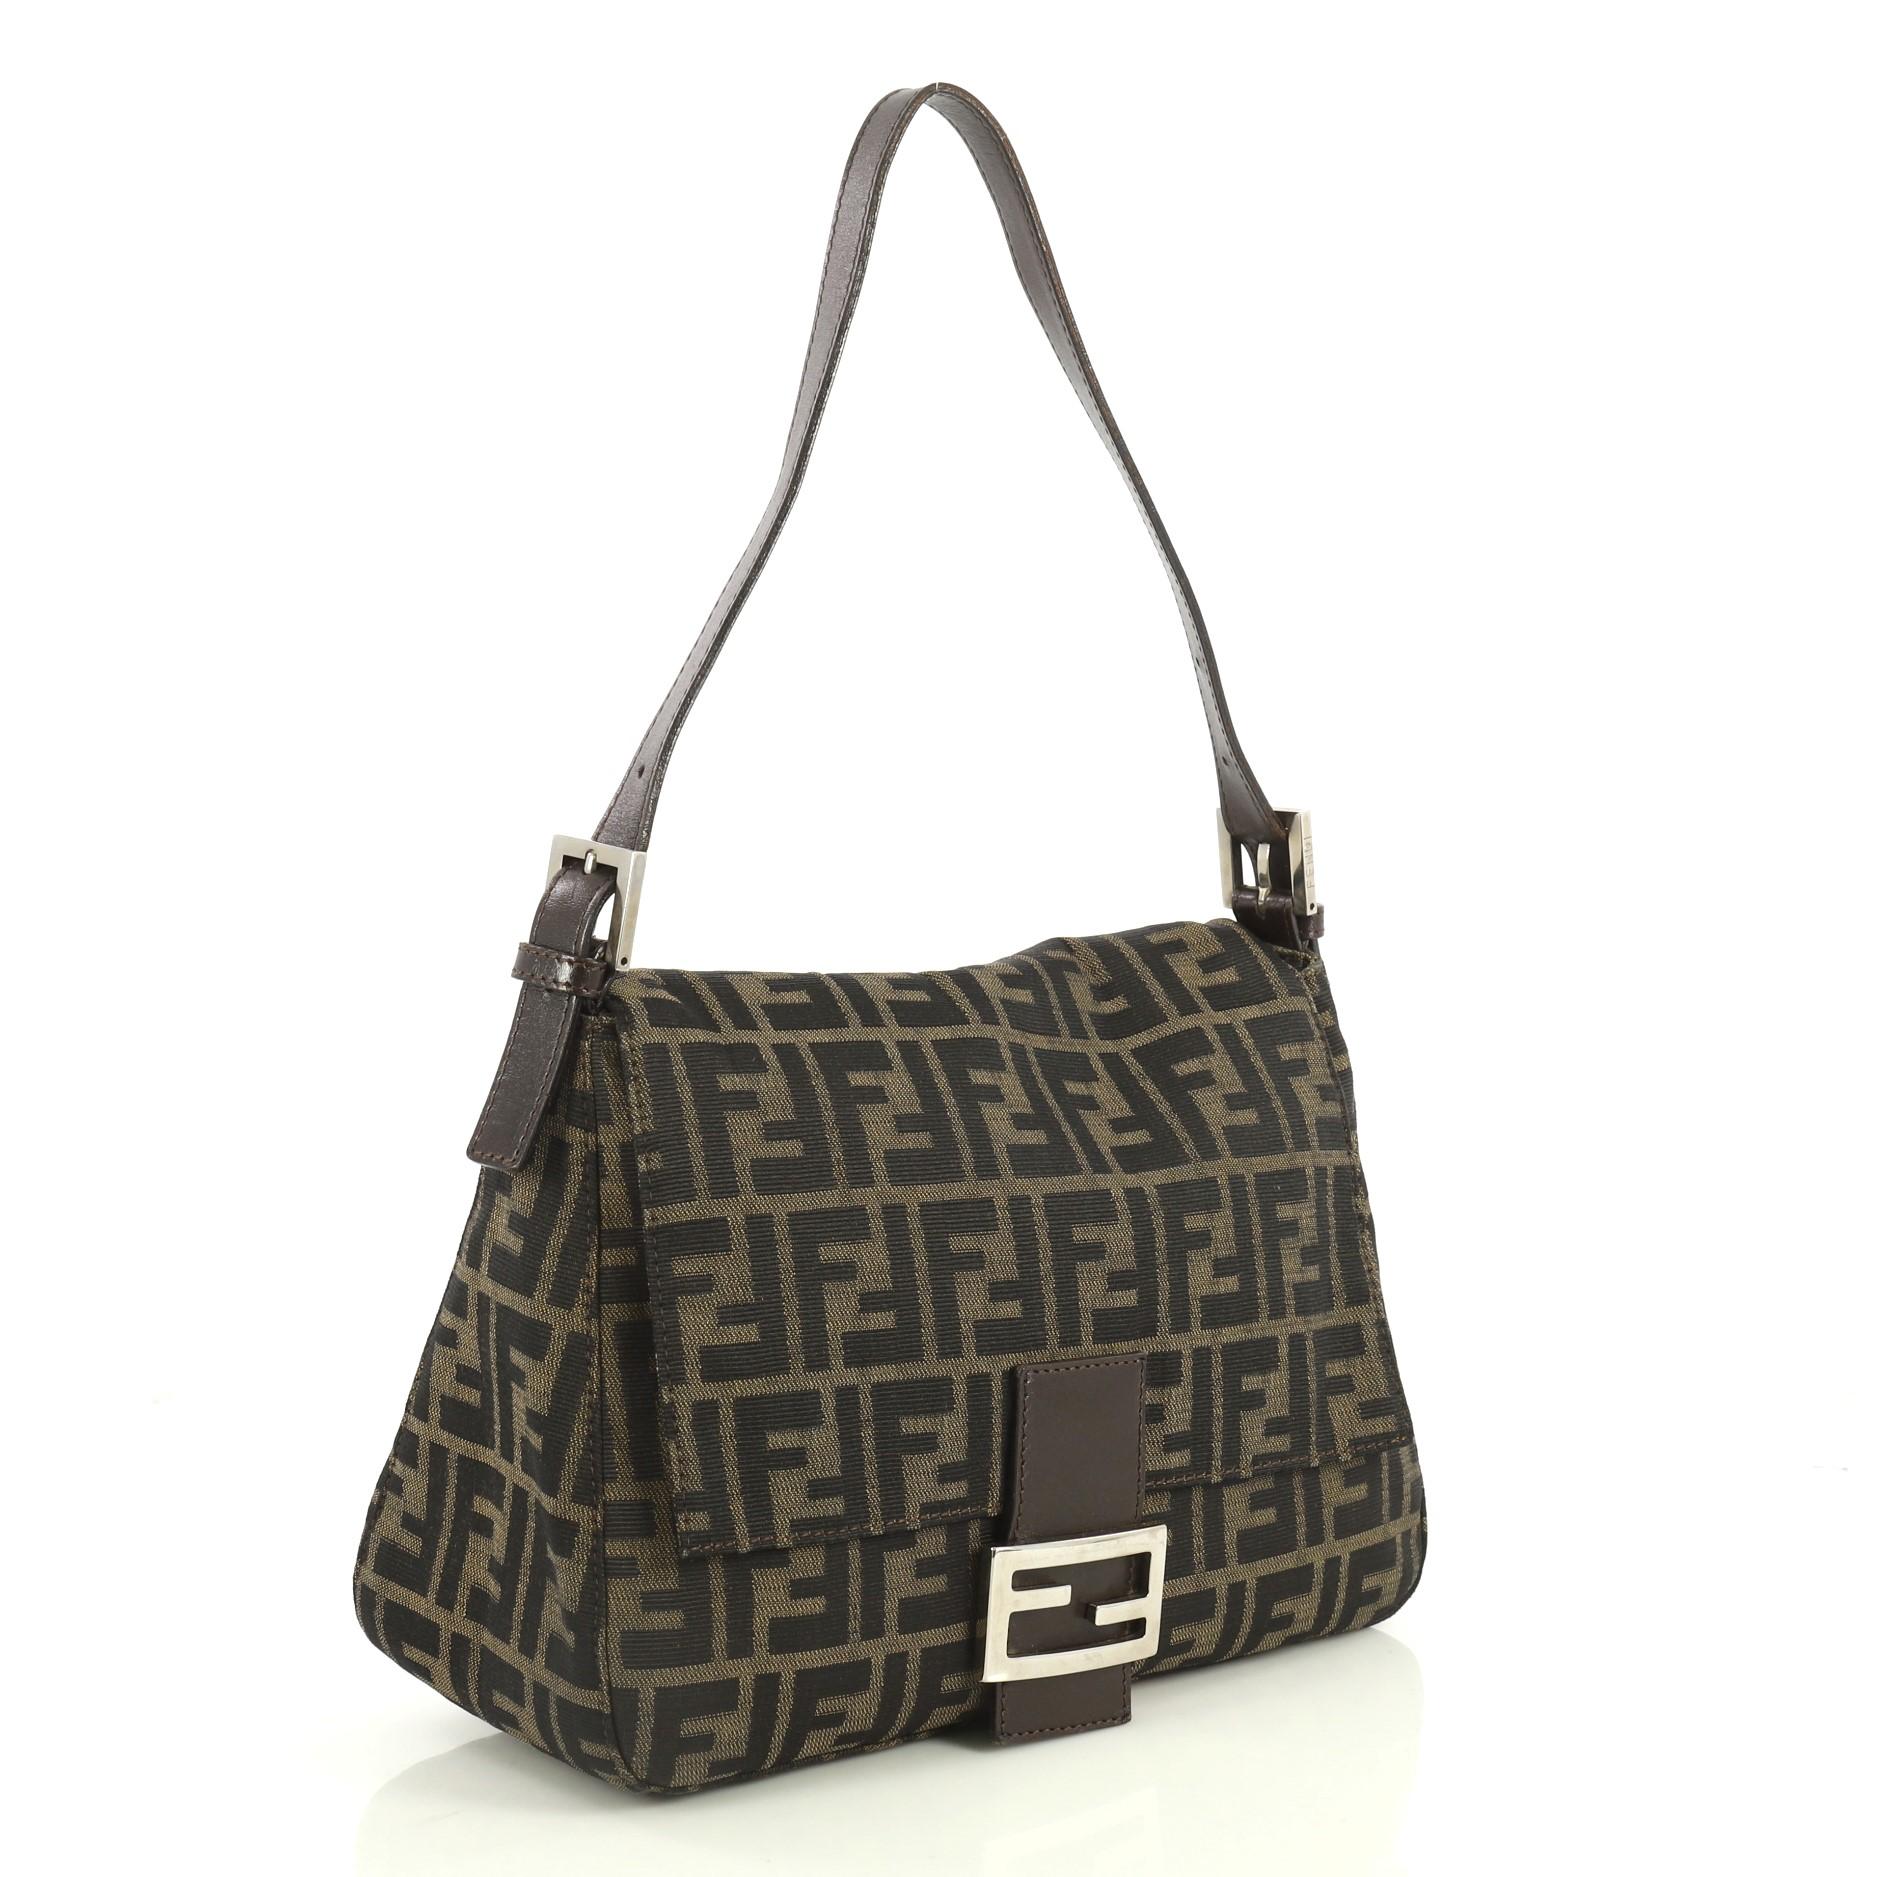 This Fendi Mama Forever Bag Zucca Canvas, crafted from brown zucca canvas, features a flat leather strap, Fendi logo detailing, and silver-tone hardware. Its hidden magnetic snap closure opens to a brown fabric interior with side zip